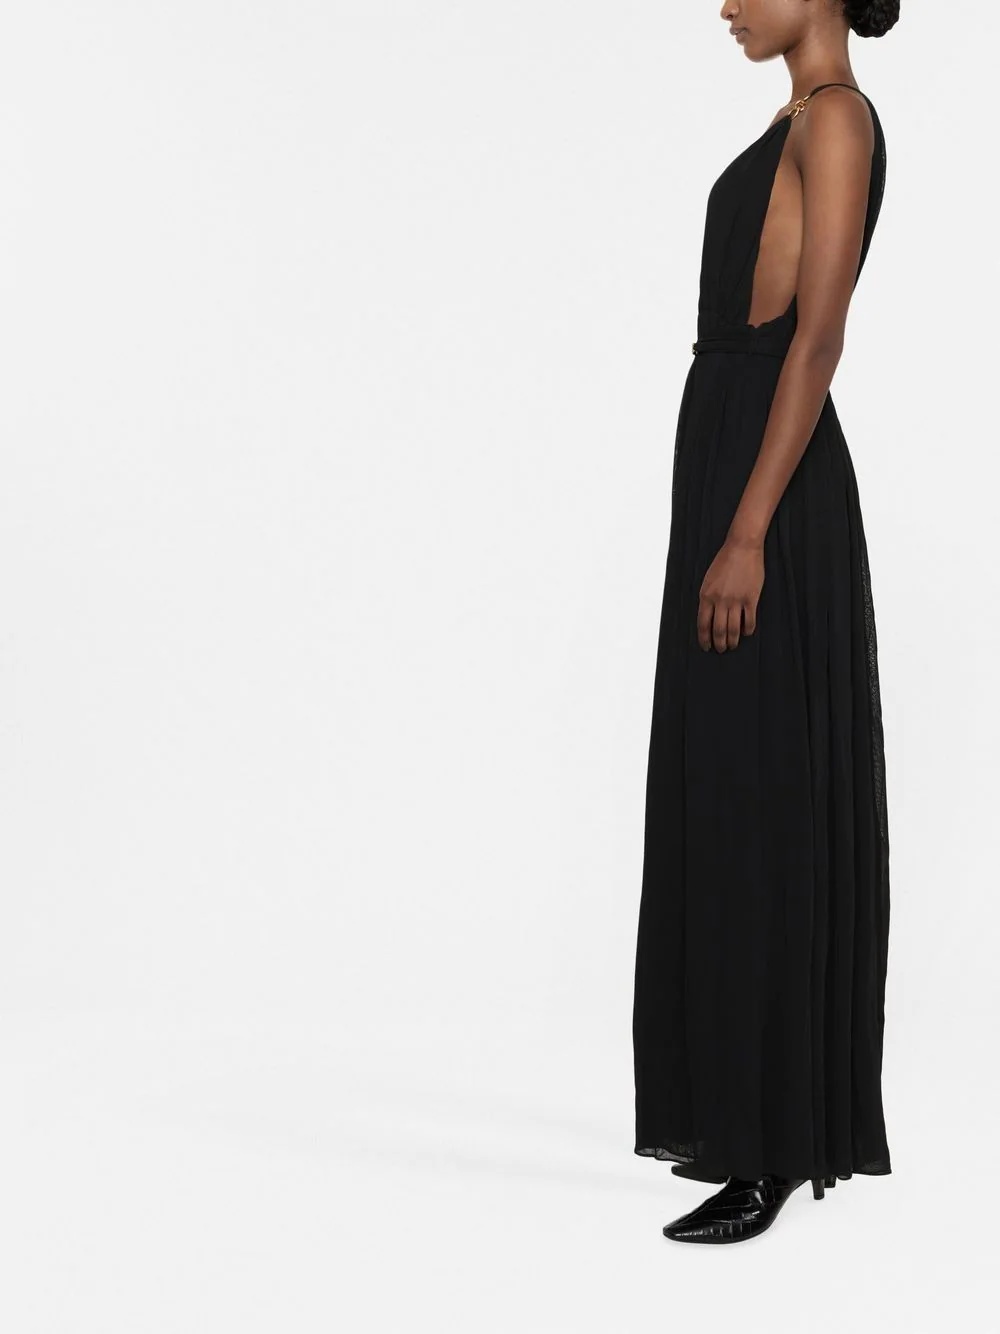 chaink-link detail V-neck gown - 3